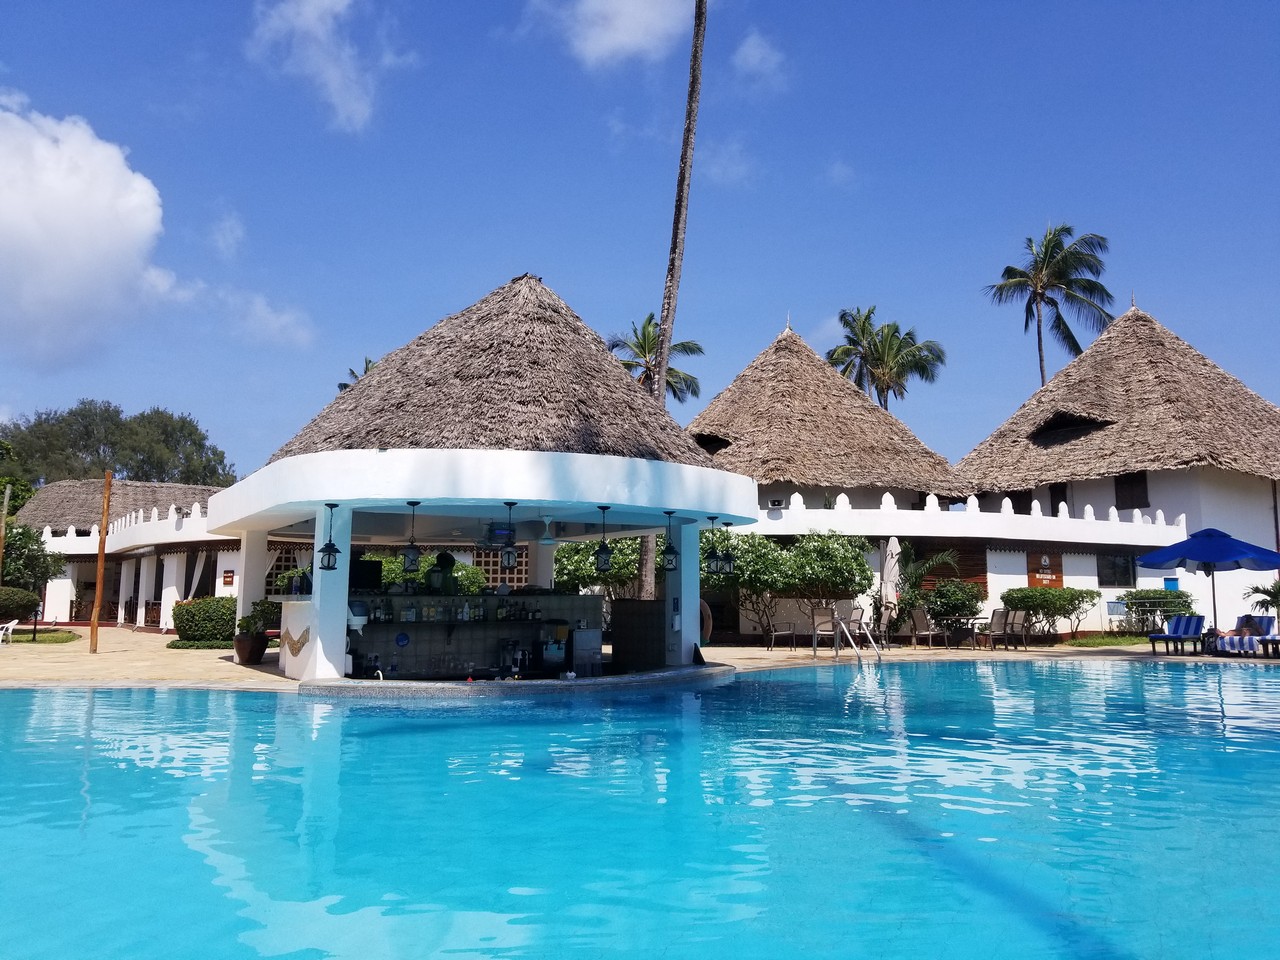 a pool with a bar and a bar in the background